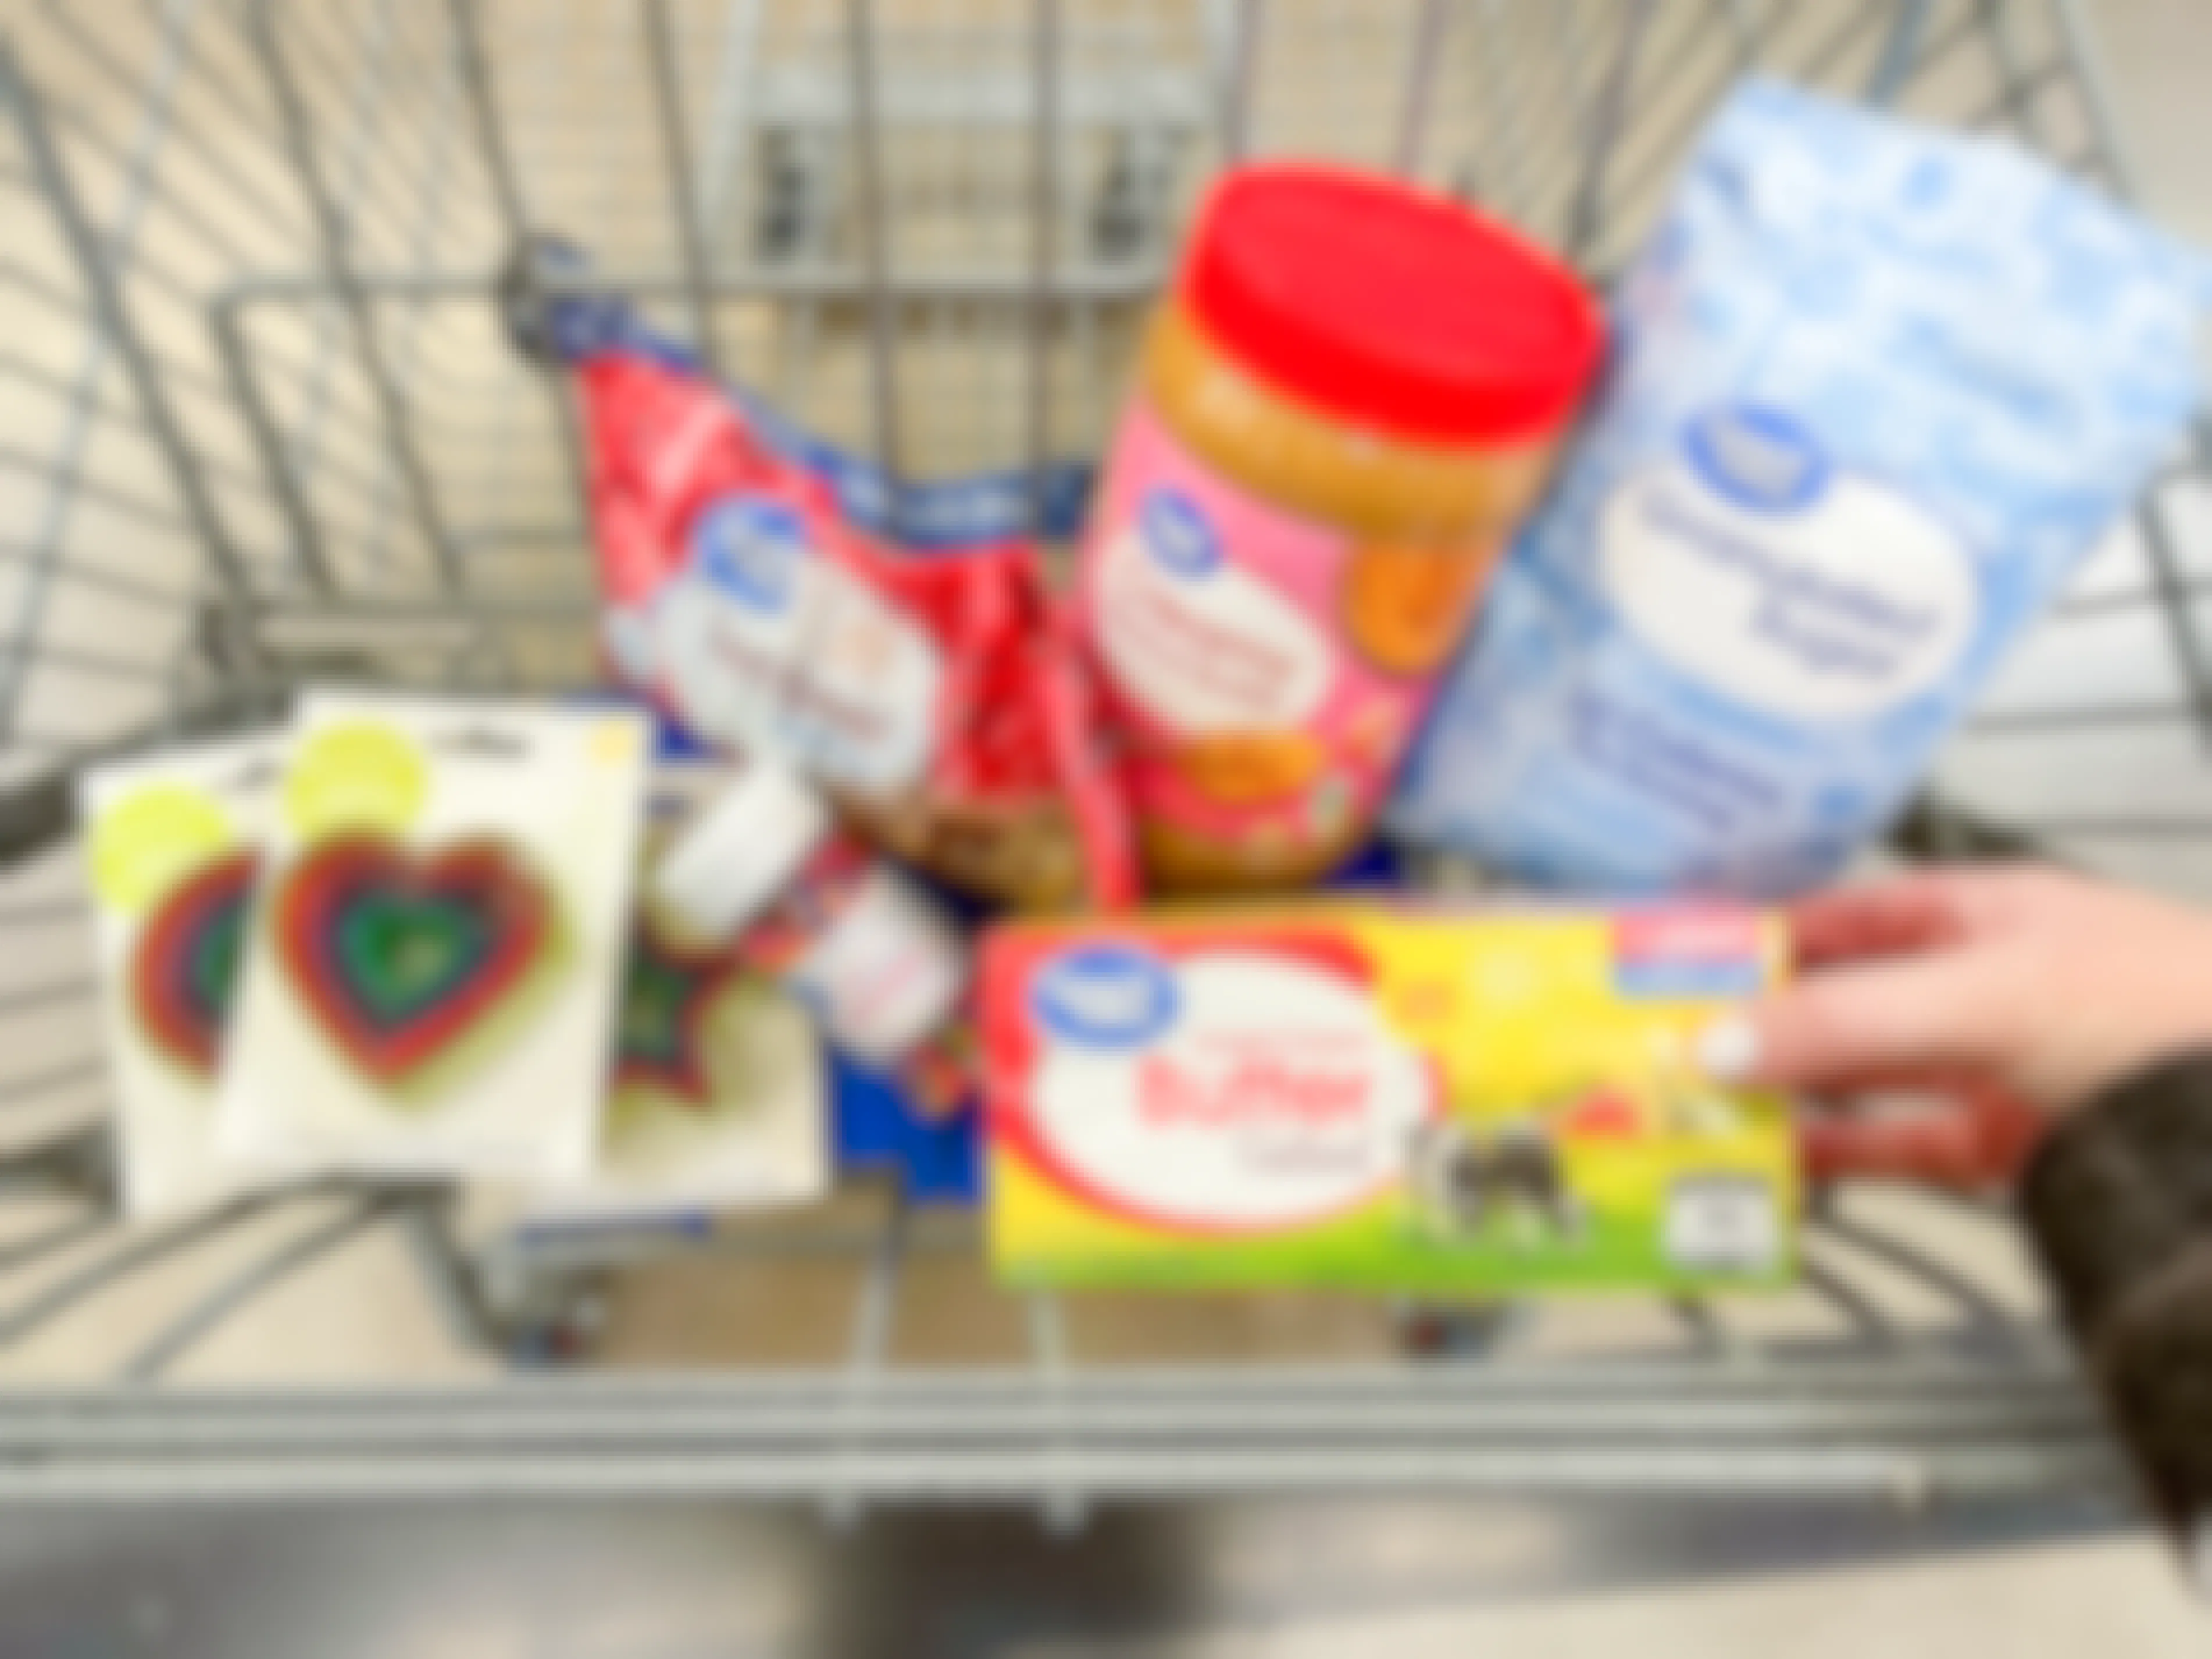 Compare Shopping Carts: How to Lower Your Christmas Cookie Cost